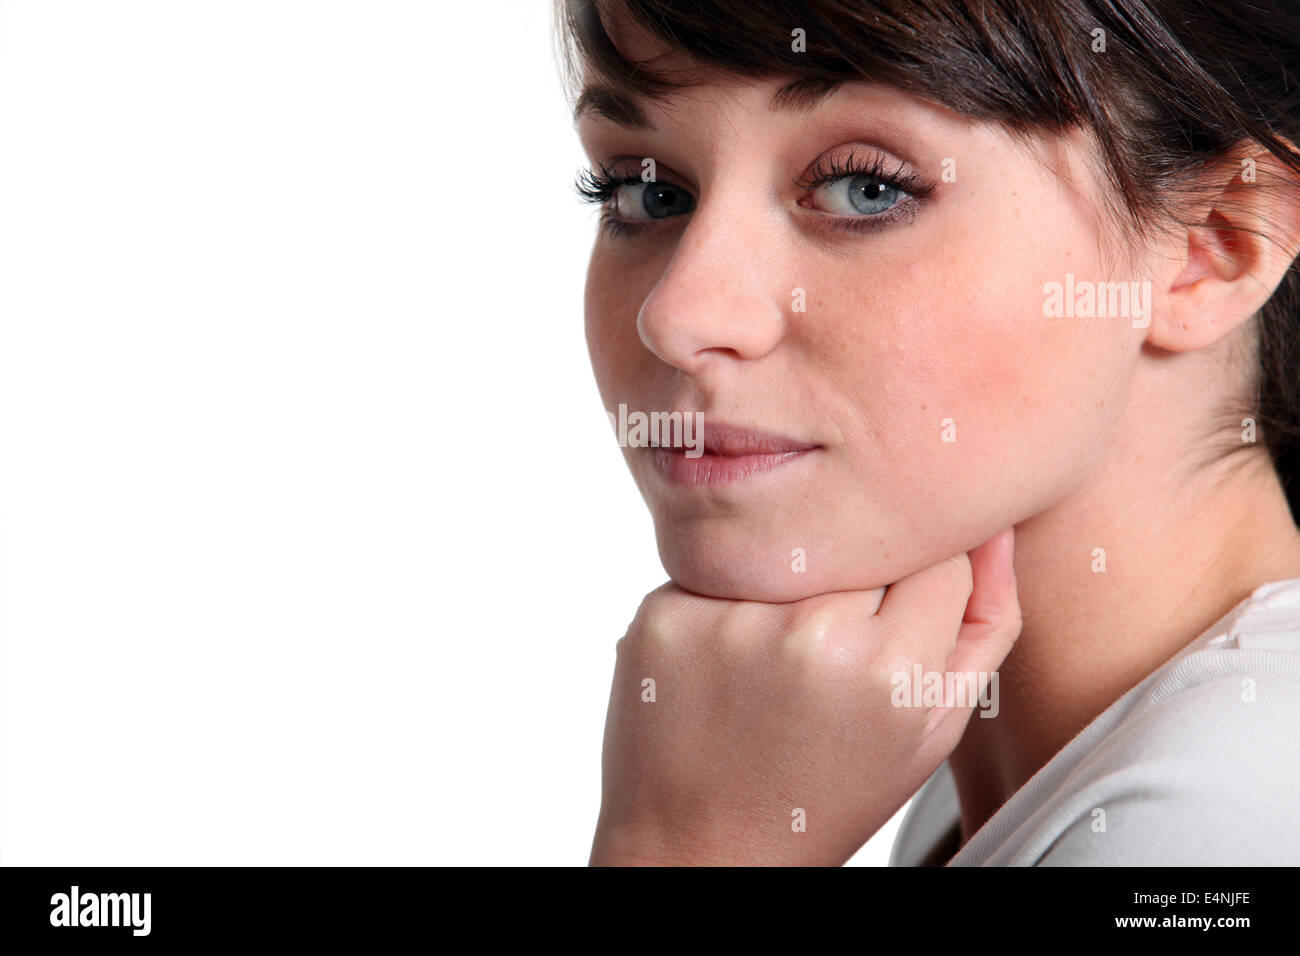 Portrait of brown-haired girl Stock Photo